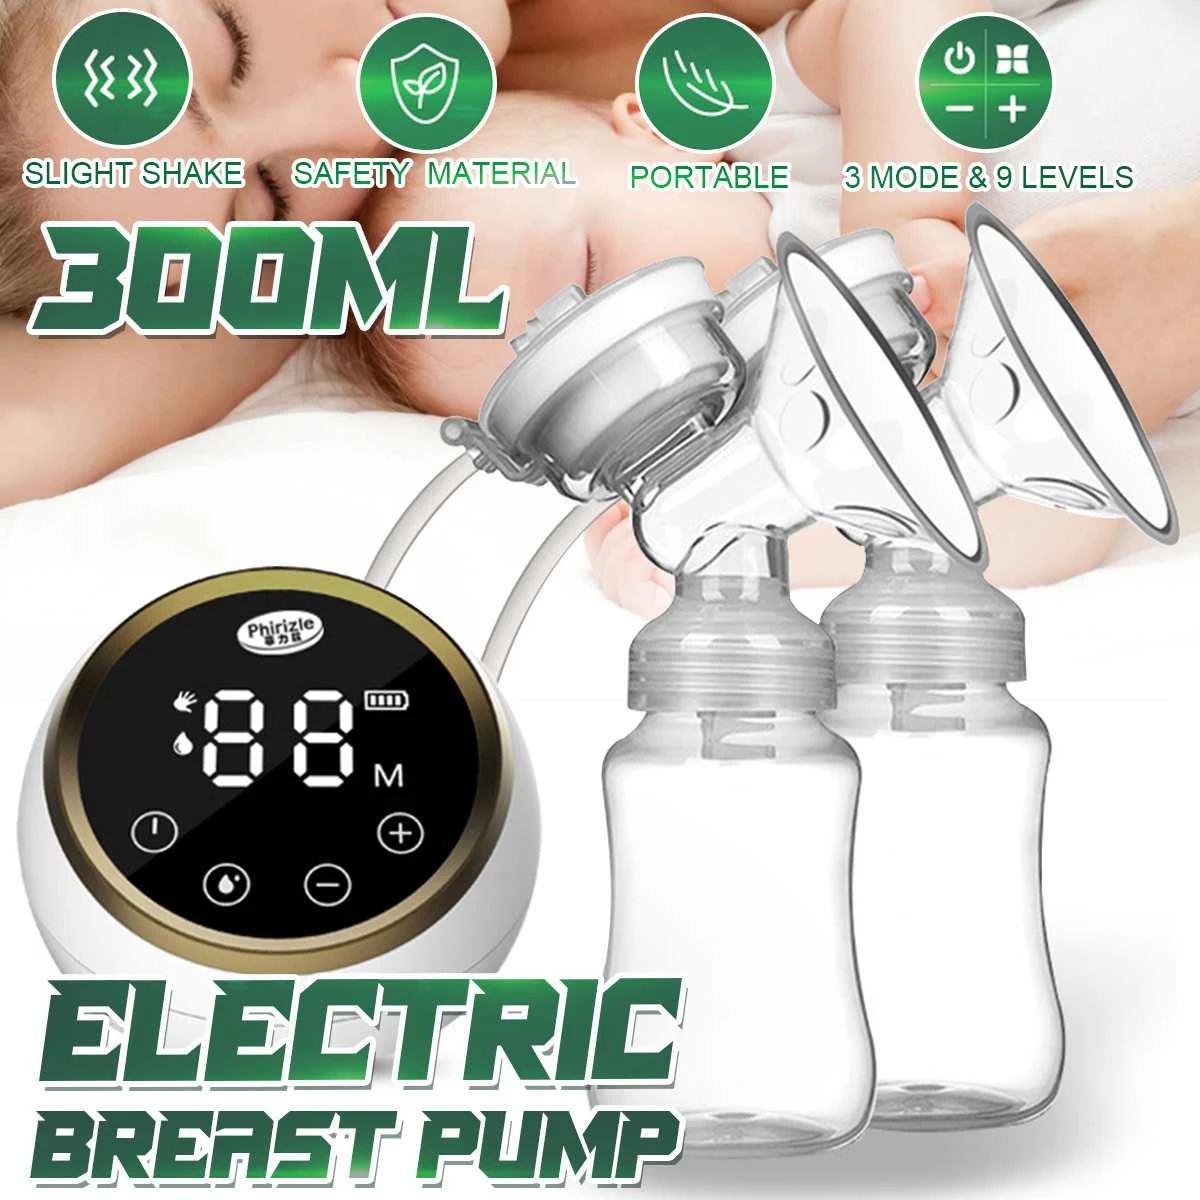 NEW 27Gears Adjustable Double Electric Breast Pump Bilateral Breast Pump Silicone Breast Pump LCD Touch Screen Control BPA Free motif twist double electric breast pump